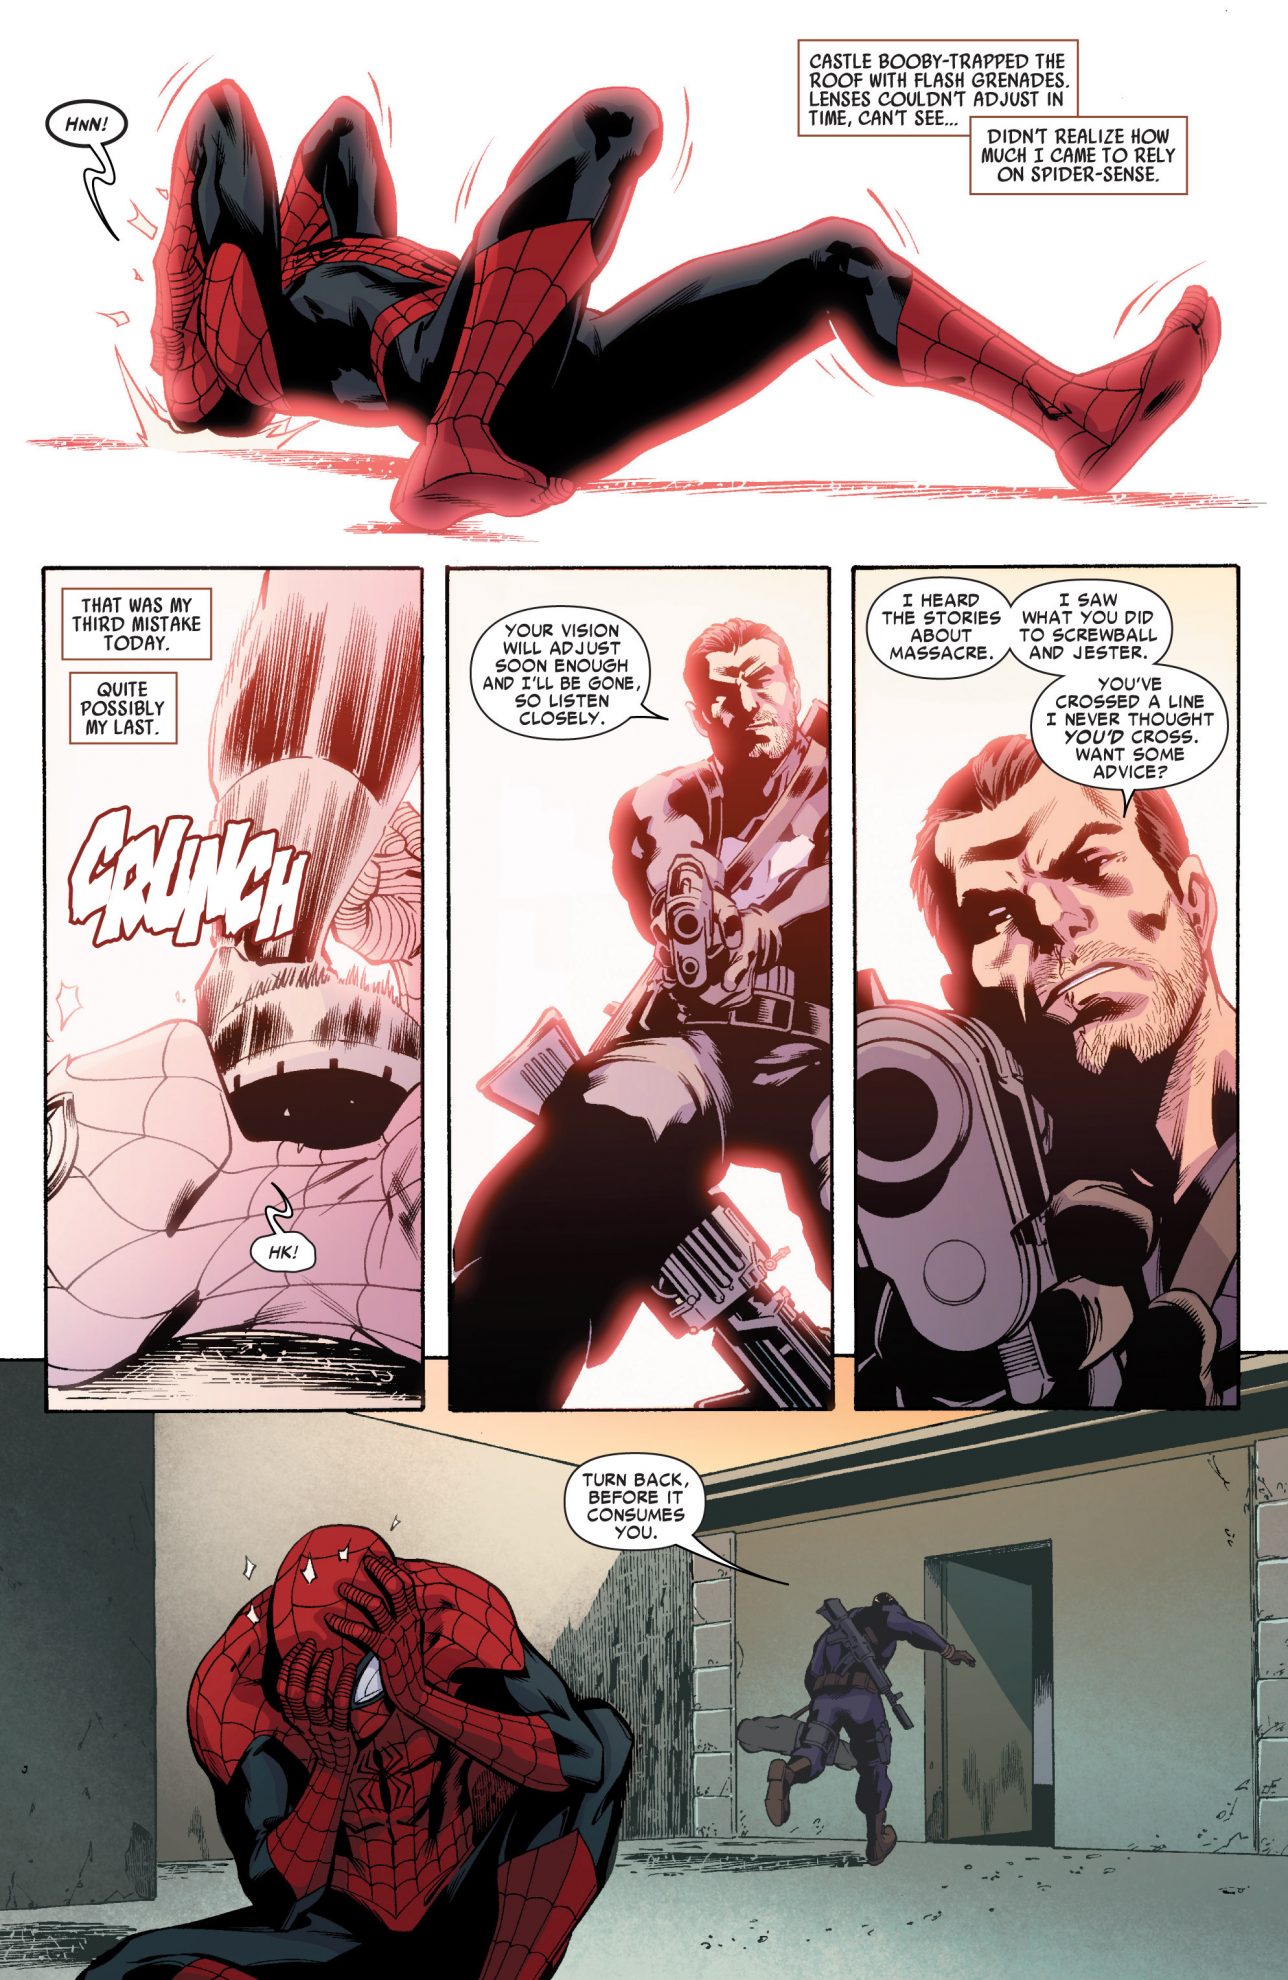 The Punisher Approves Of Superior Spider-Man's Methods